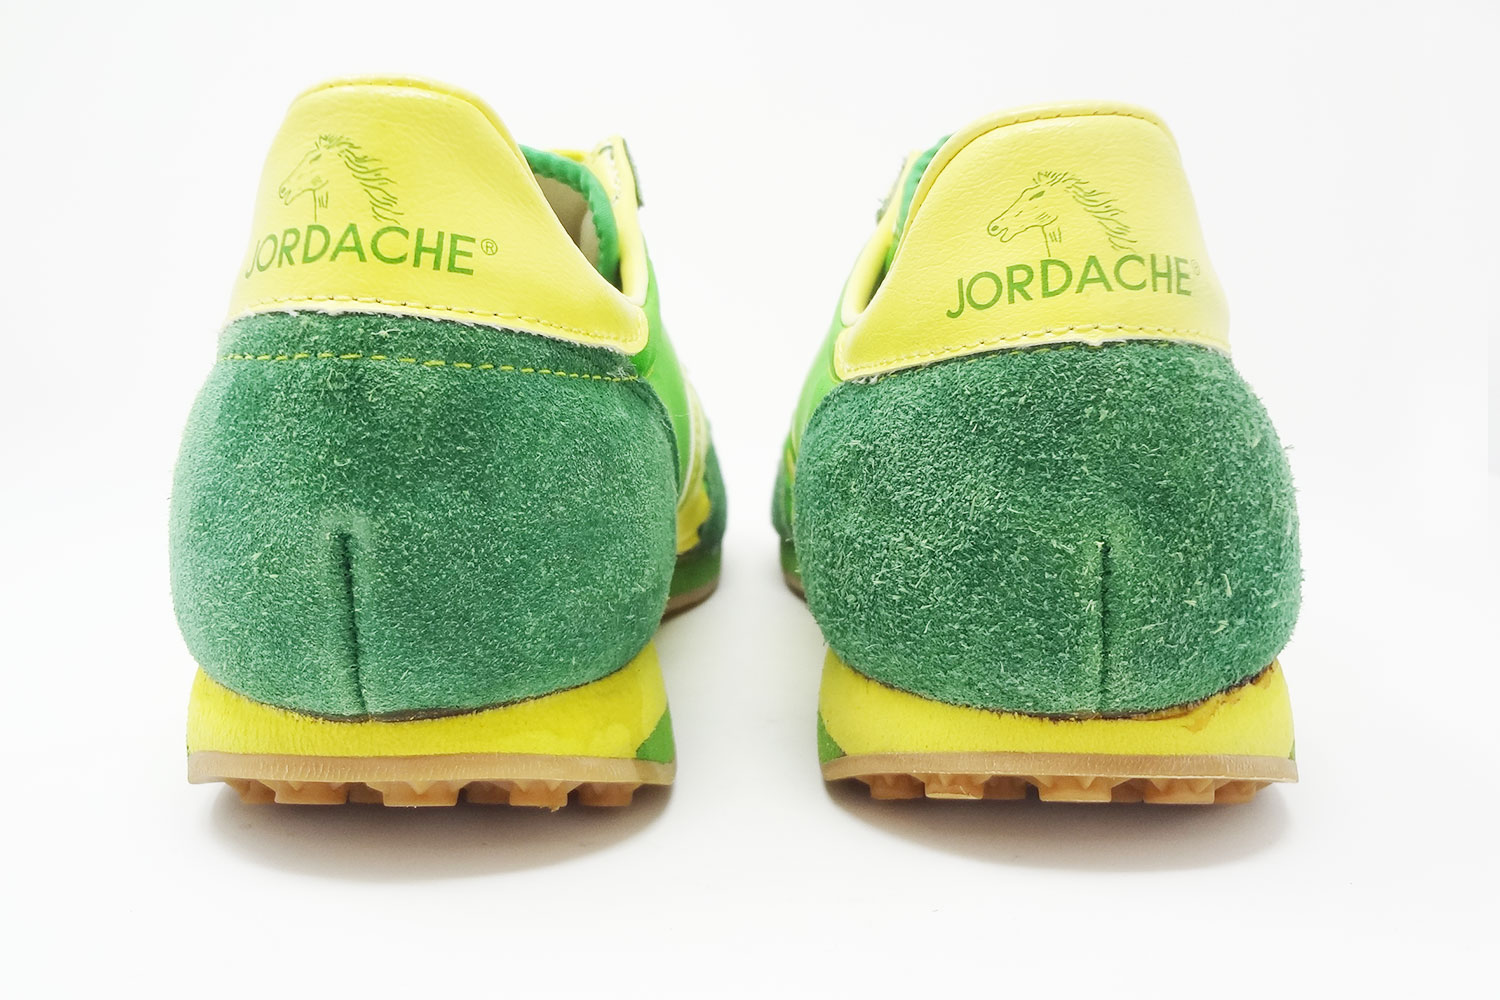 Jordache green and yellow rare vintage running shoes @ The Deffest